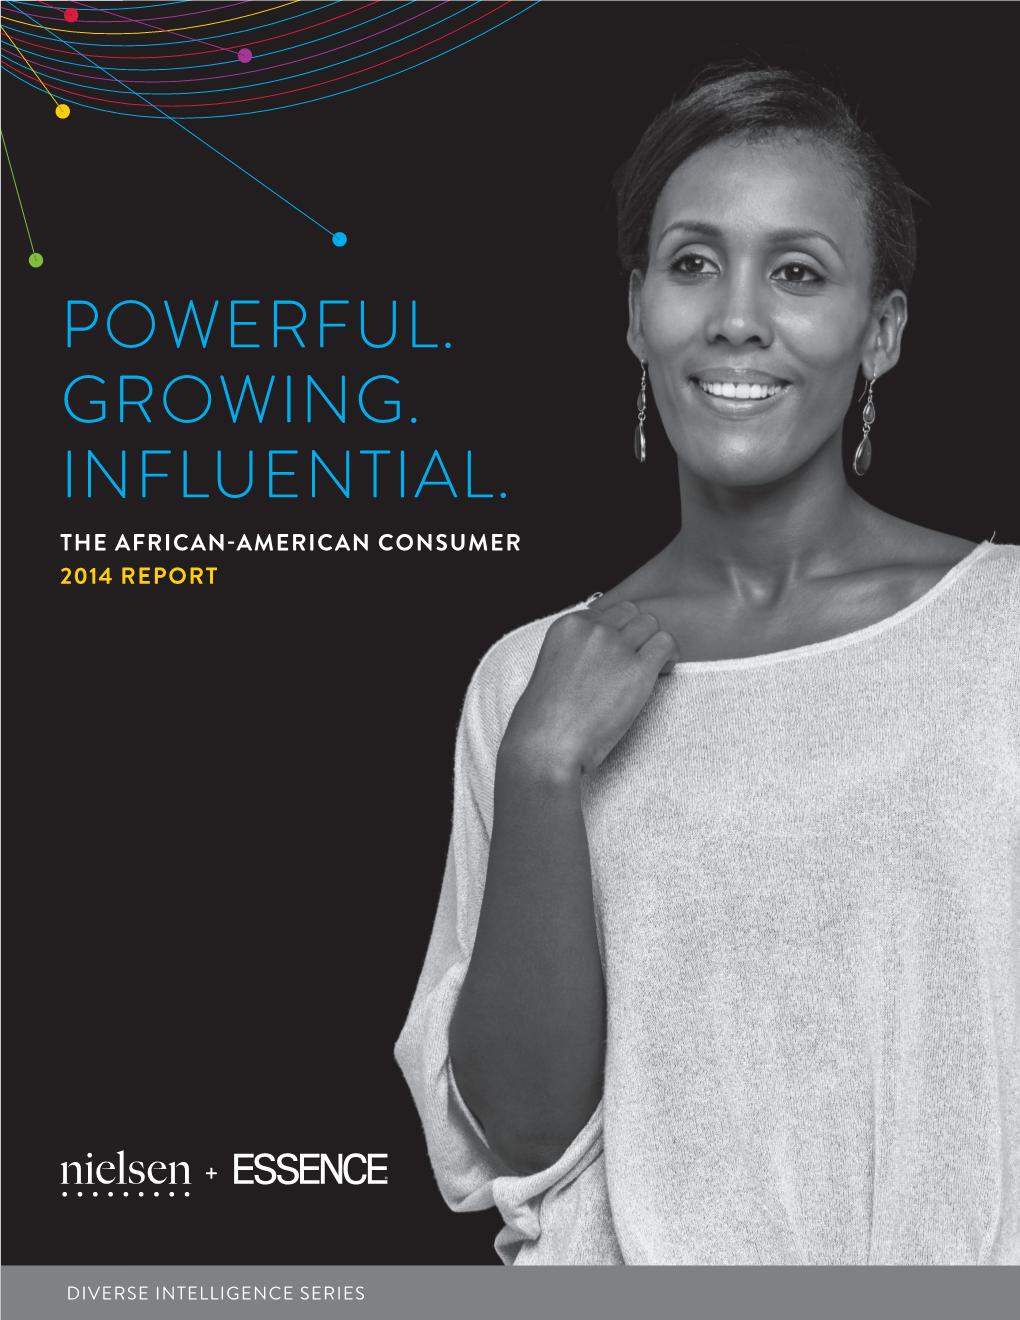 Powerful. Growing. Influential. the African-American Consumer 2014 Report